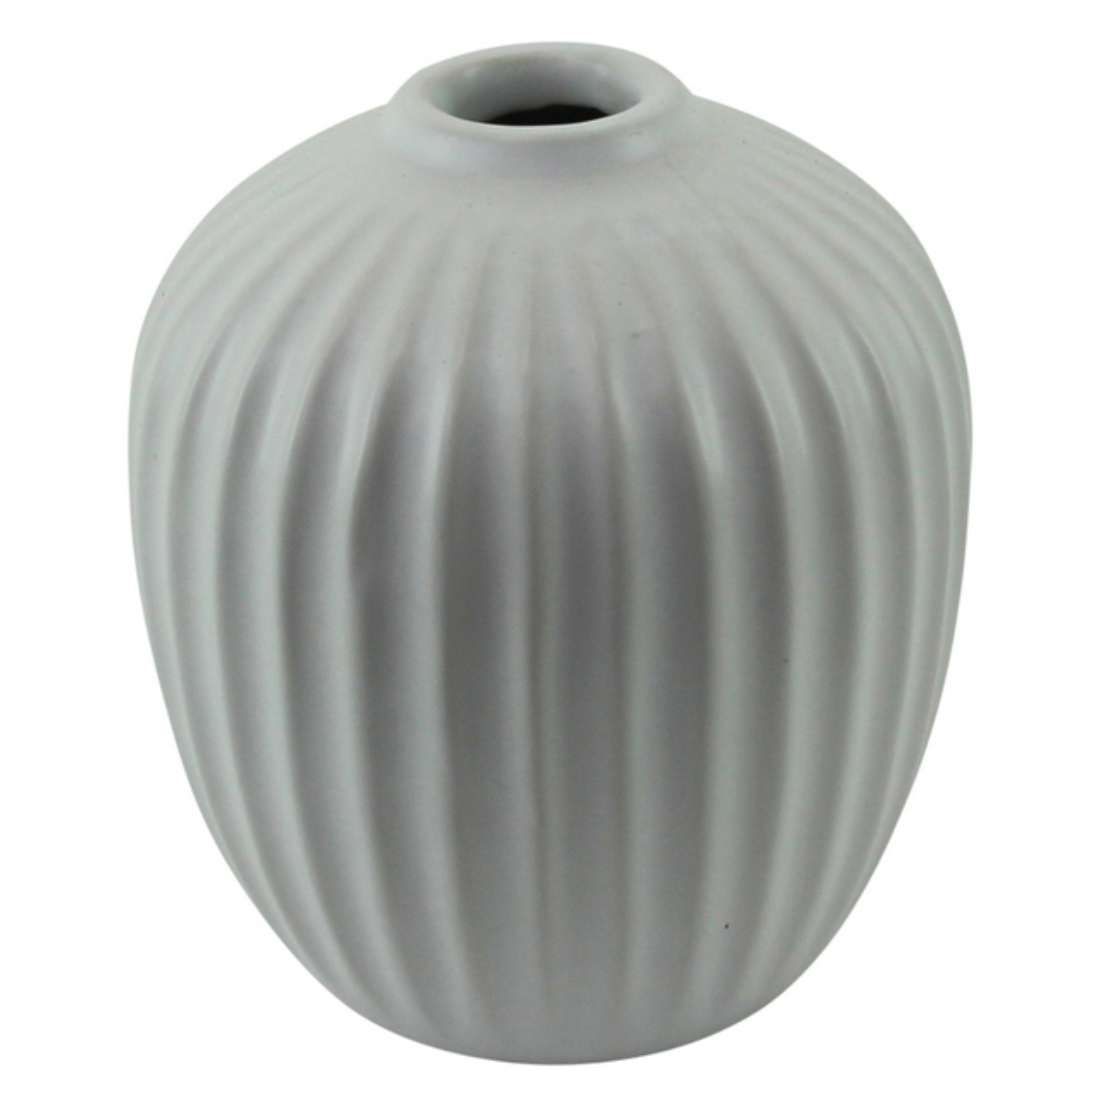 Grooved Bud White Vase - different sizes available - Daisy Grace Lifestyle